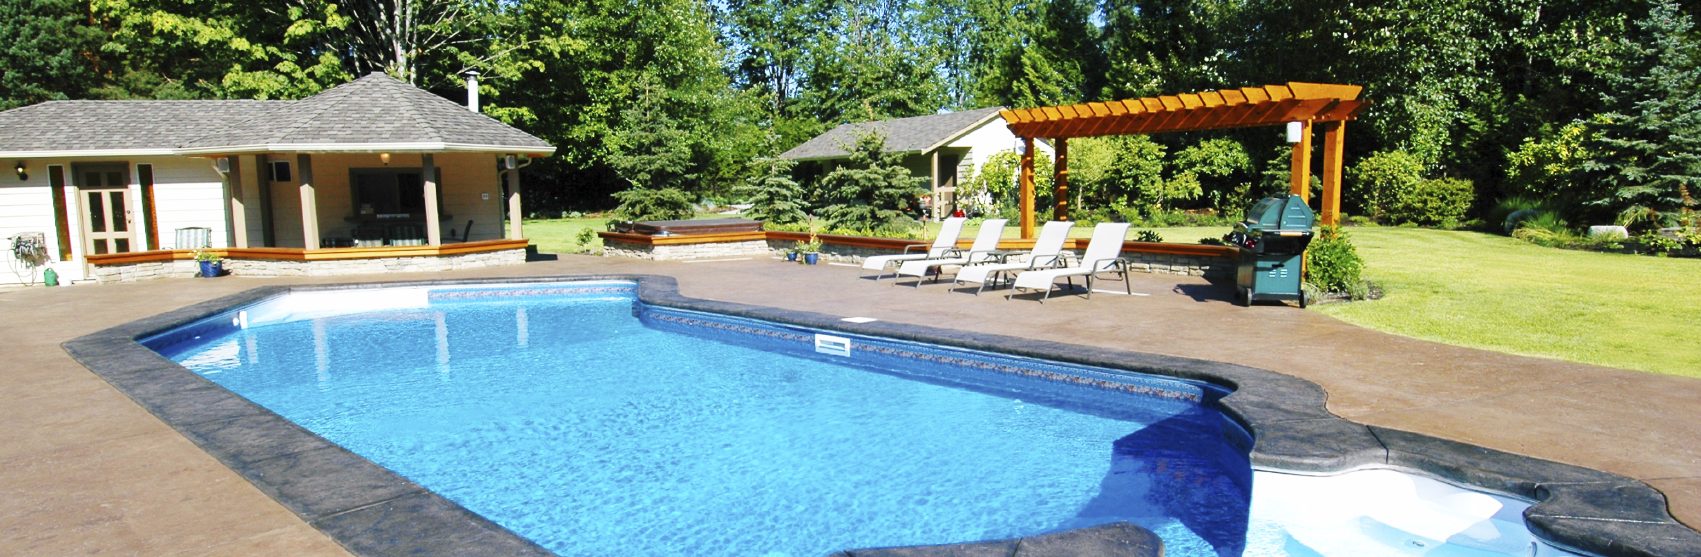 Tips for Closing and Winterizing Your Pool